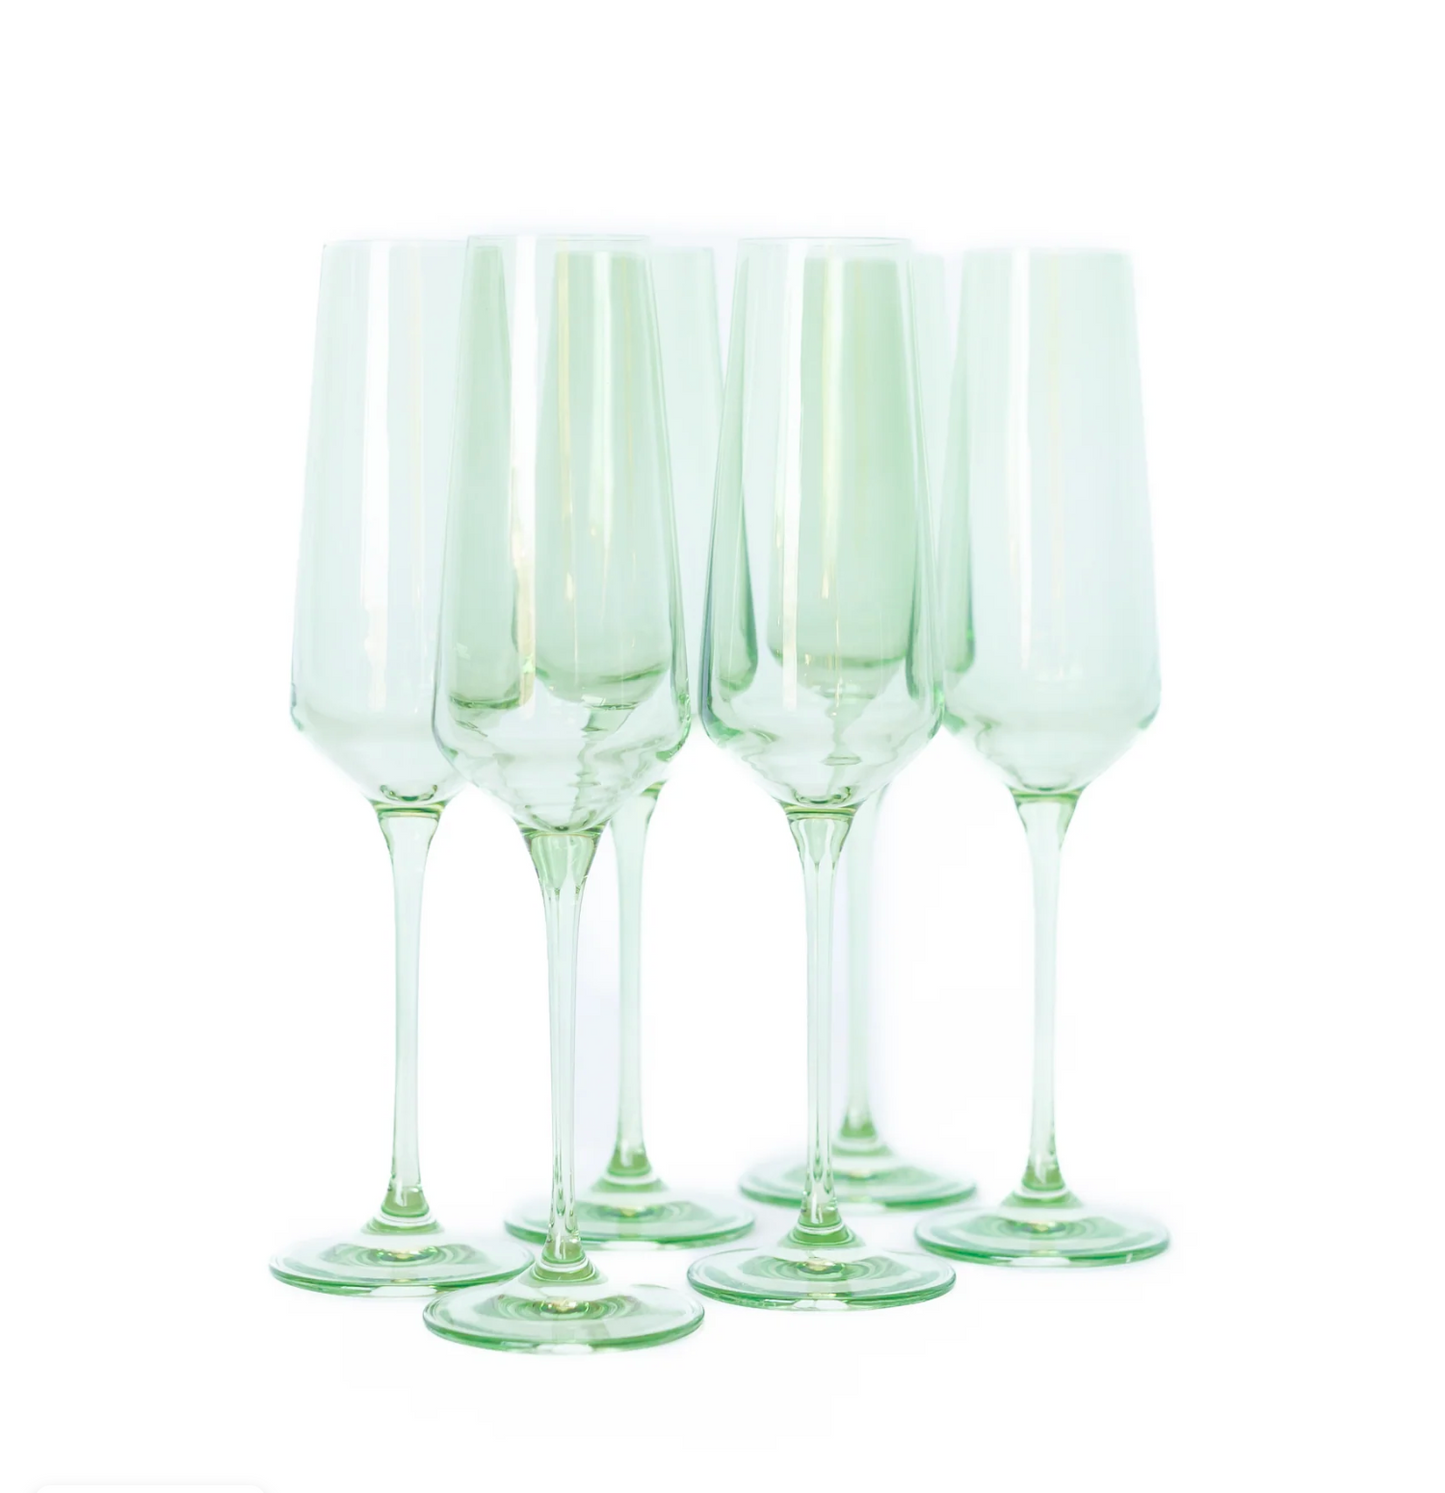 Colored Champagne Flute - Mint Green - Estelle Colored Glass (Set of 6)